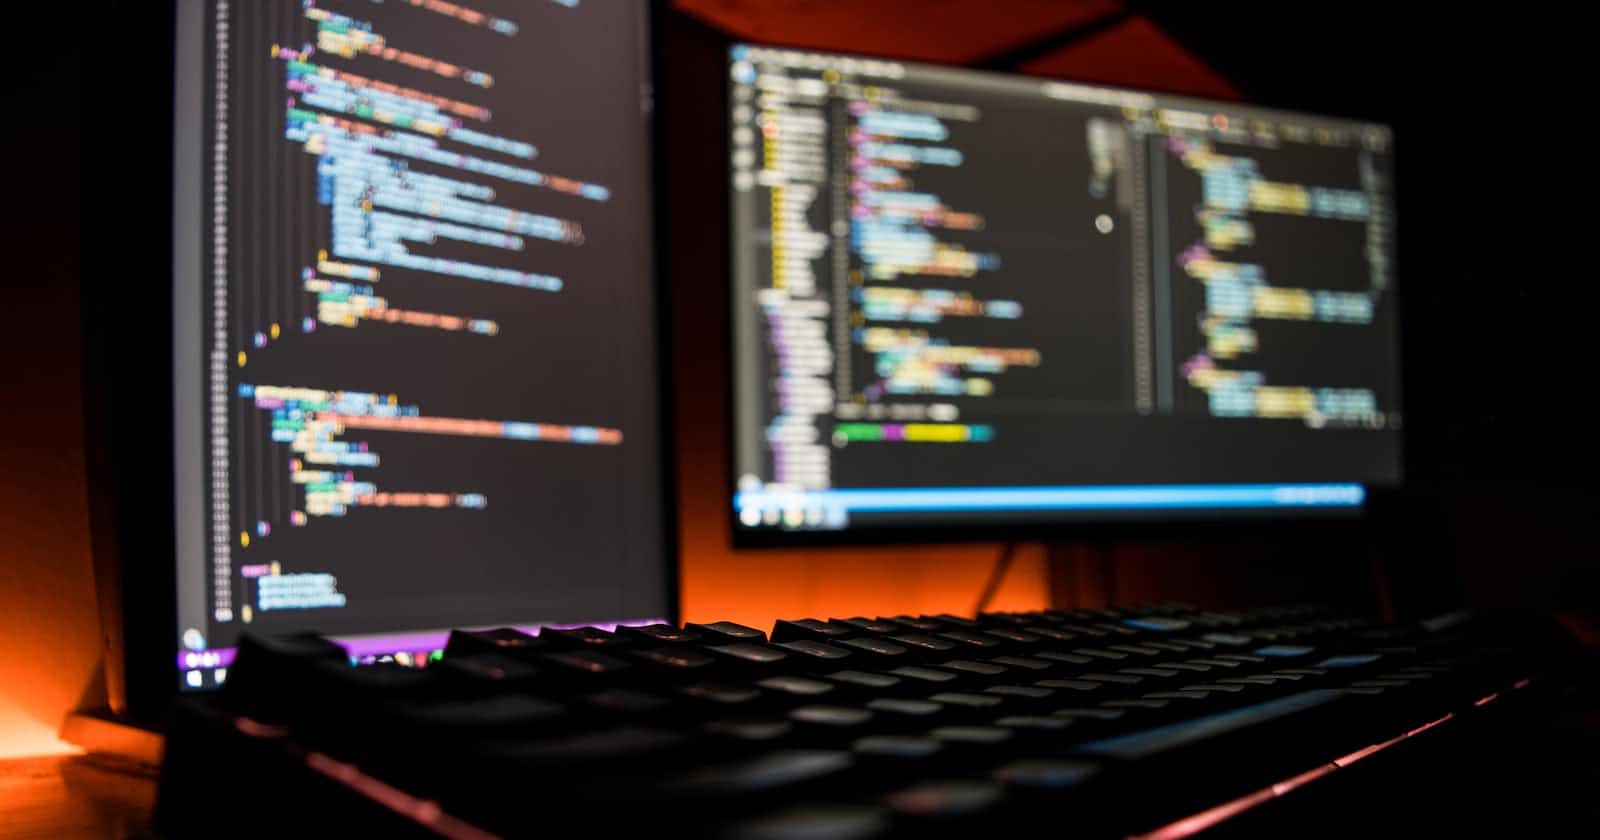 C Programming: A Step-by-Step Guide for Beginners